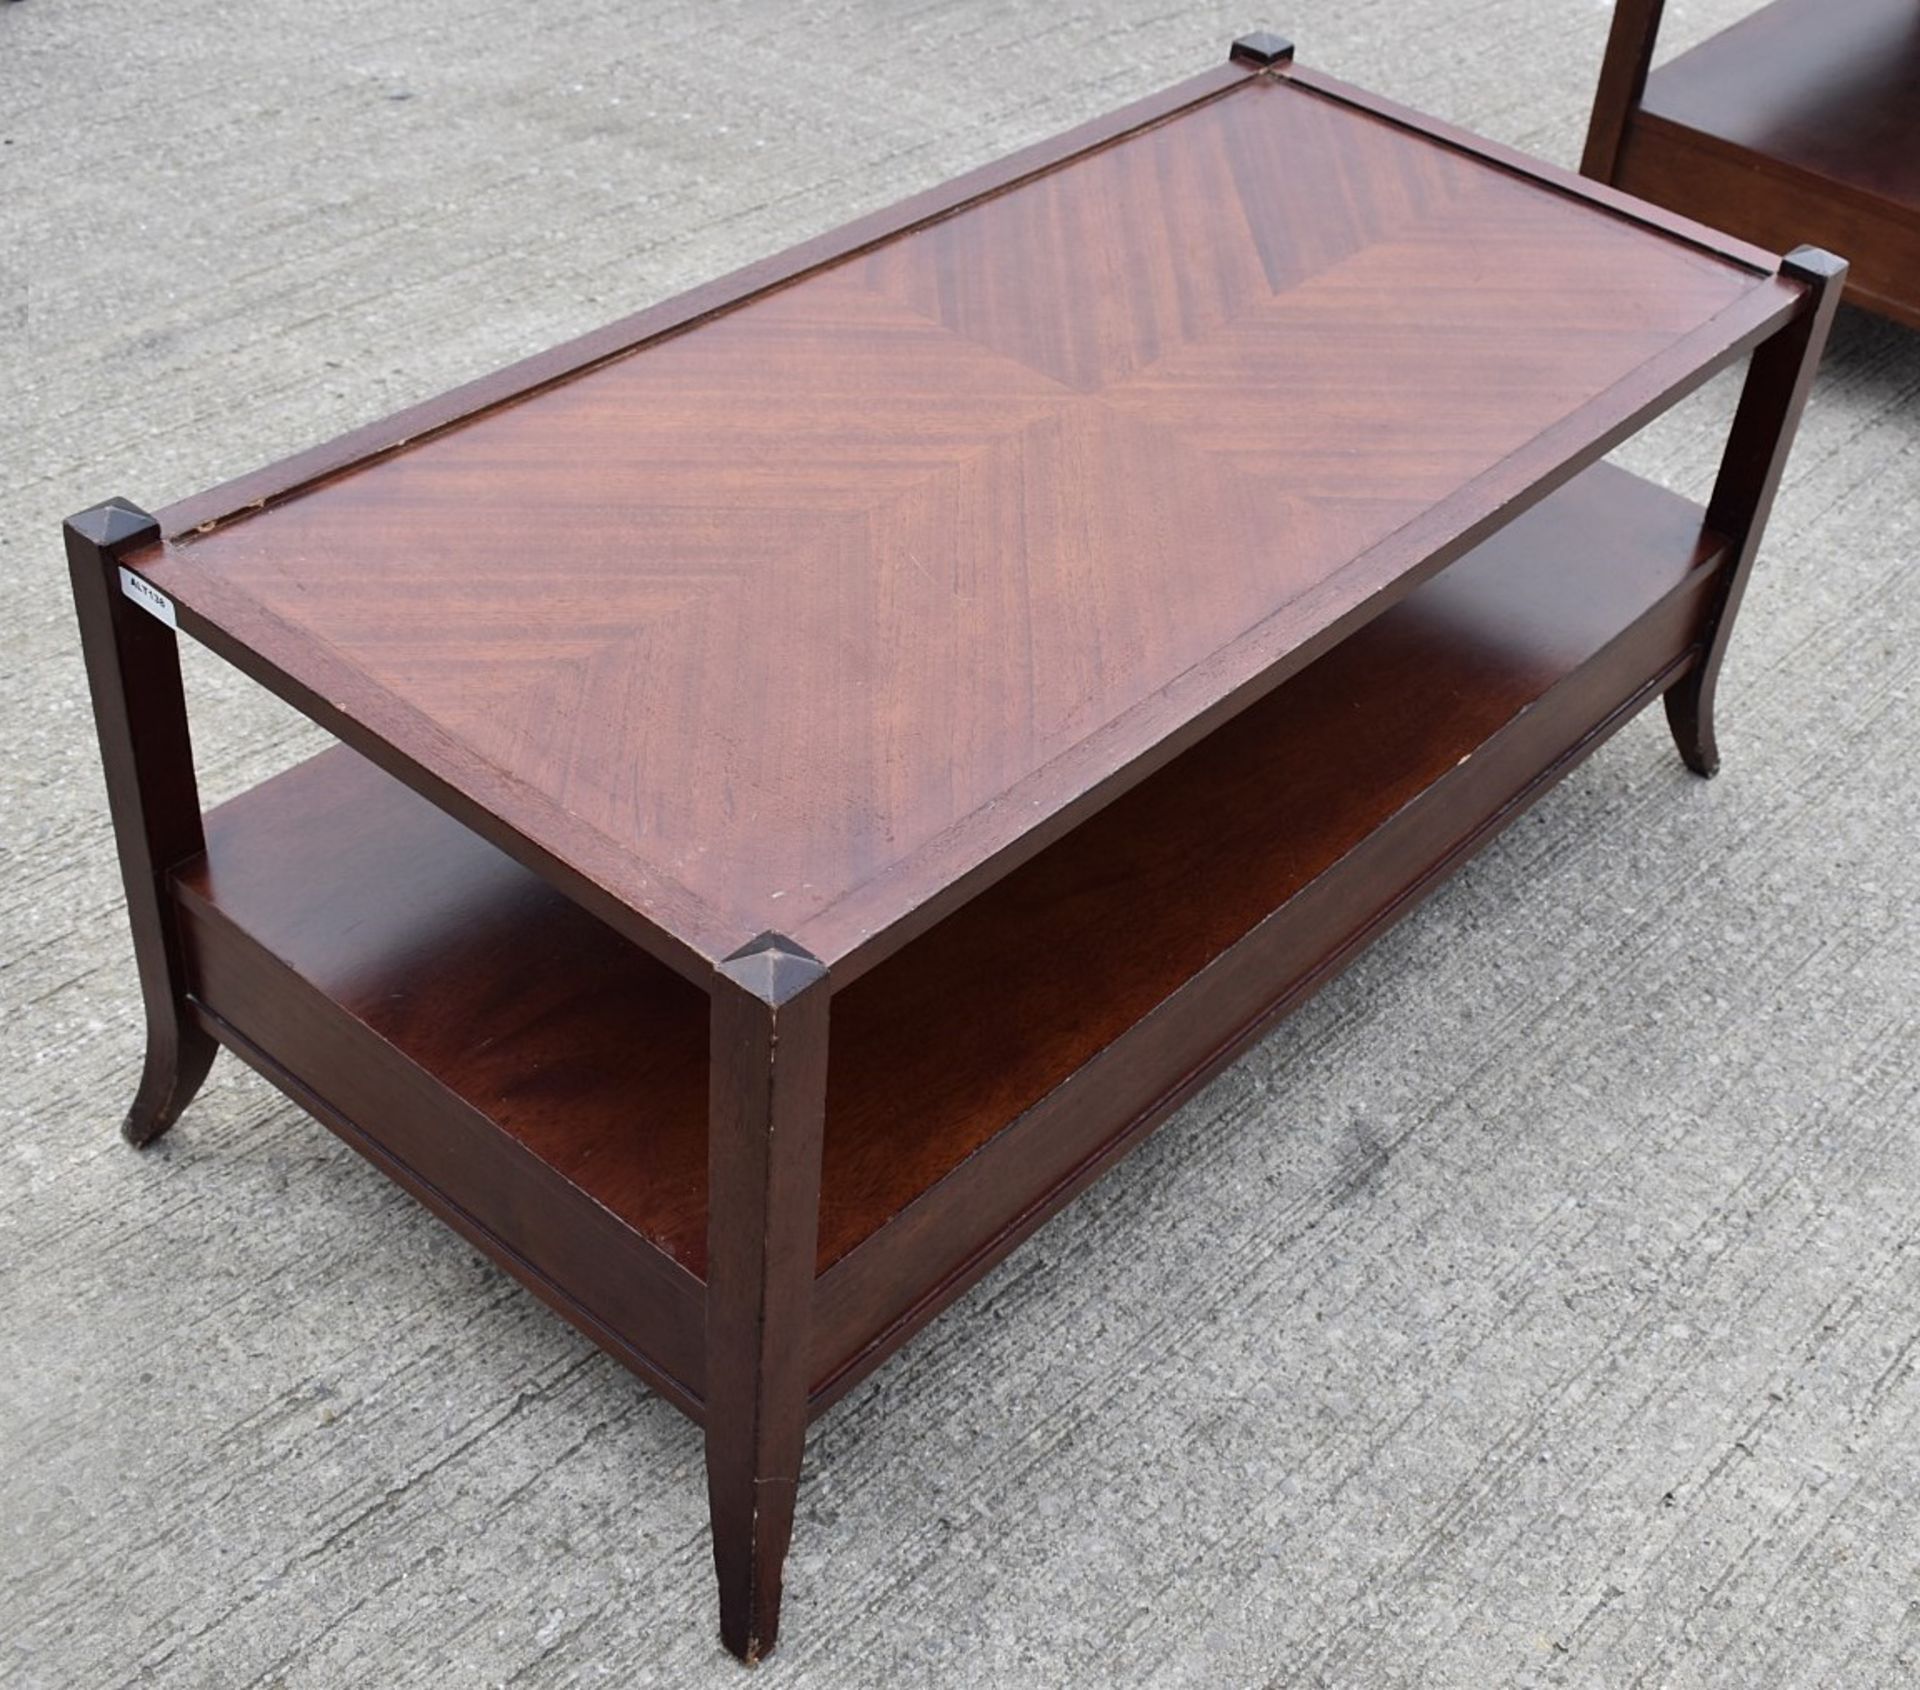 1 x Elegant Handcrafted Solid Wood Coffee / Cocktail Table with False Drawer Frontage - Recently - Bild 3 aus 3